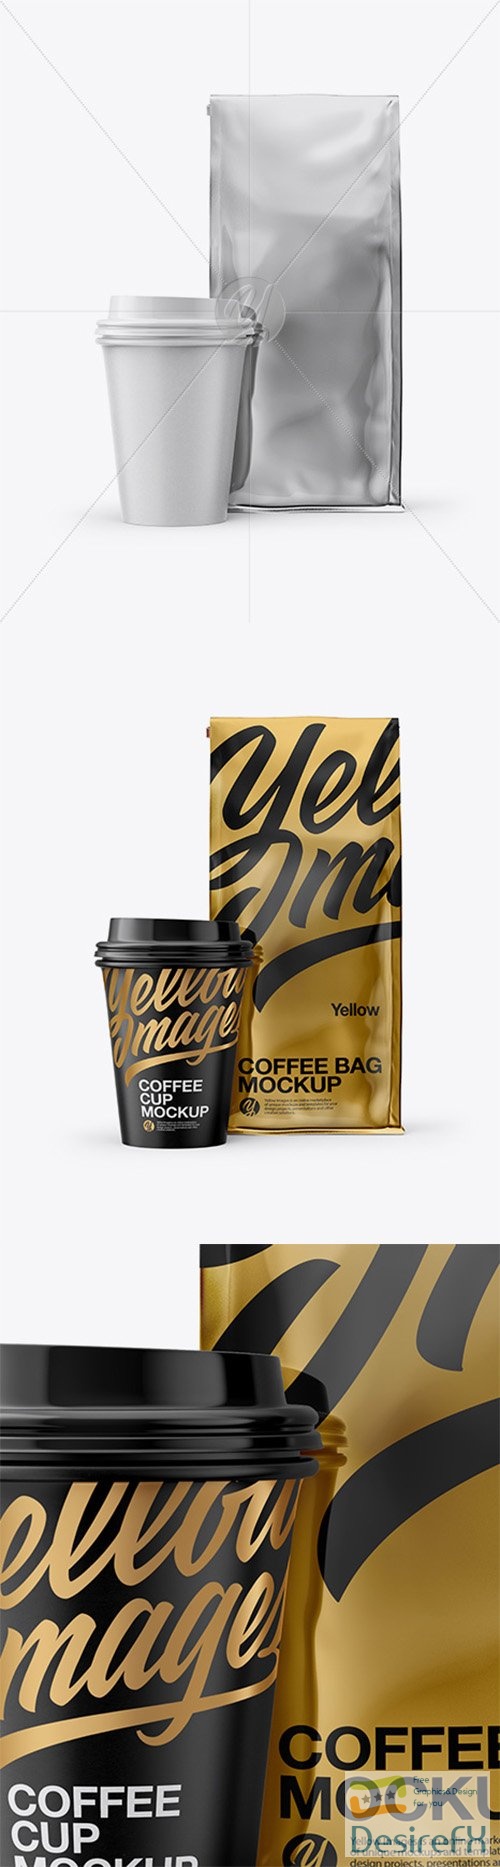 Metallic Bag with Coffee Cup Mockup - Front View 23266 TIF